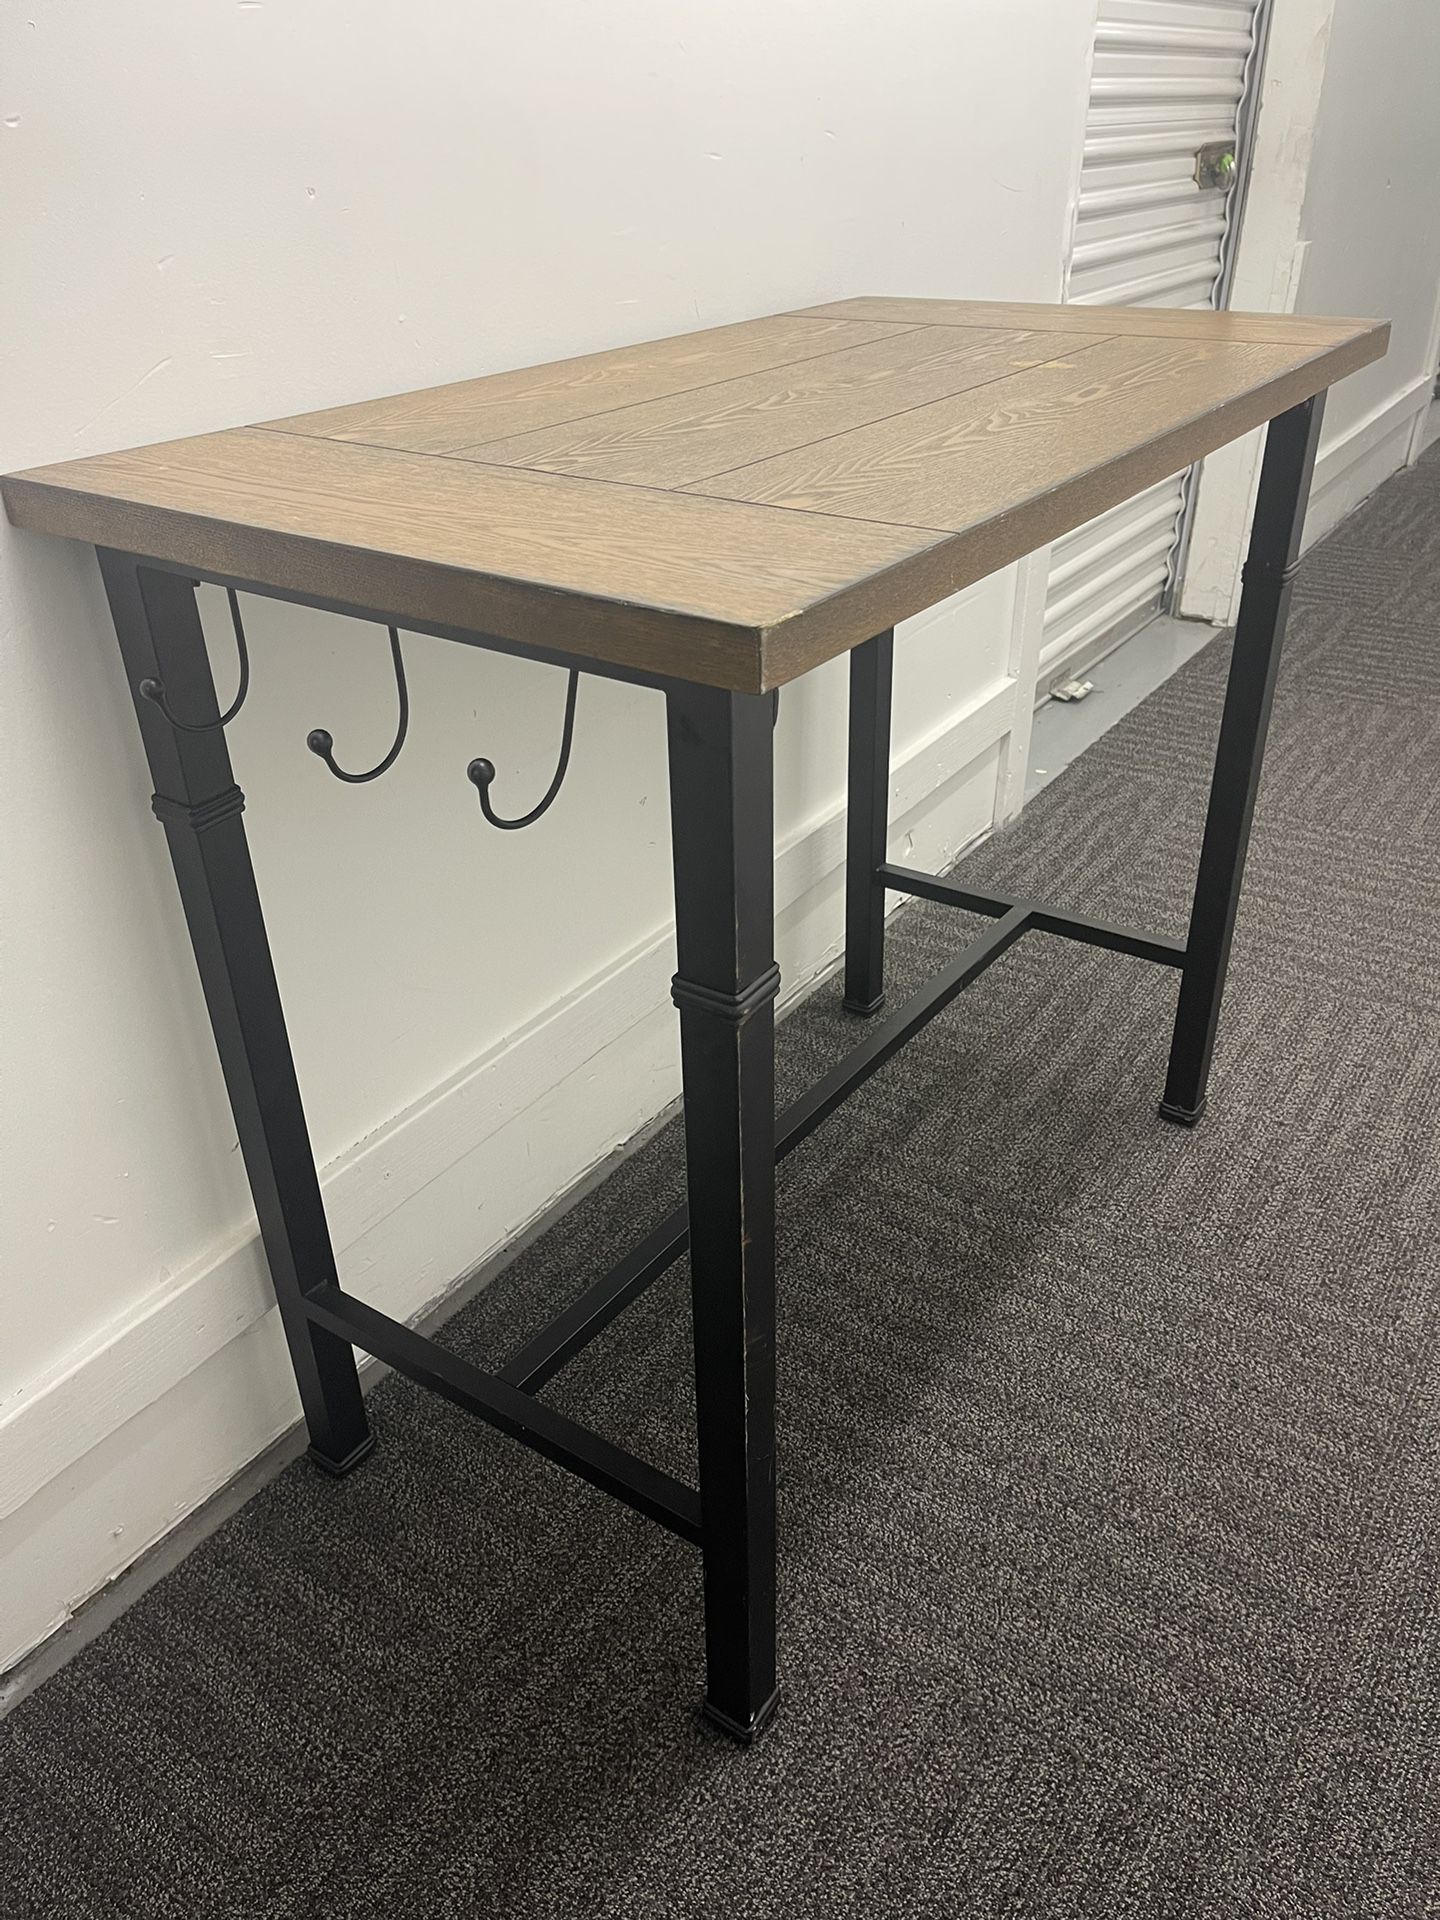 3 Pieces Metal Frame - Table And Chairs 